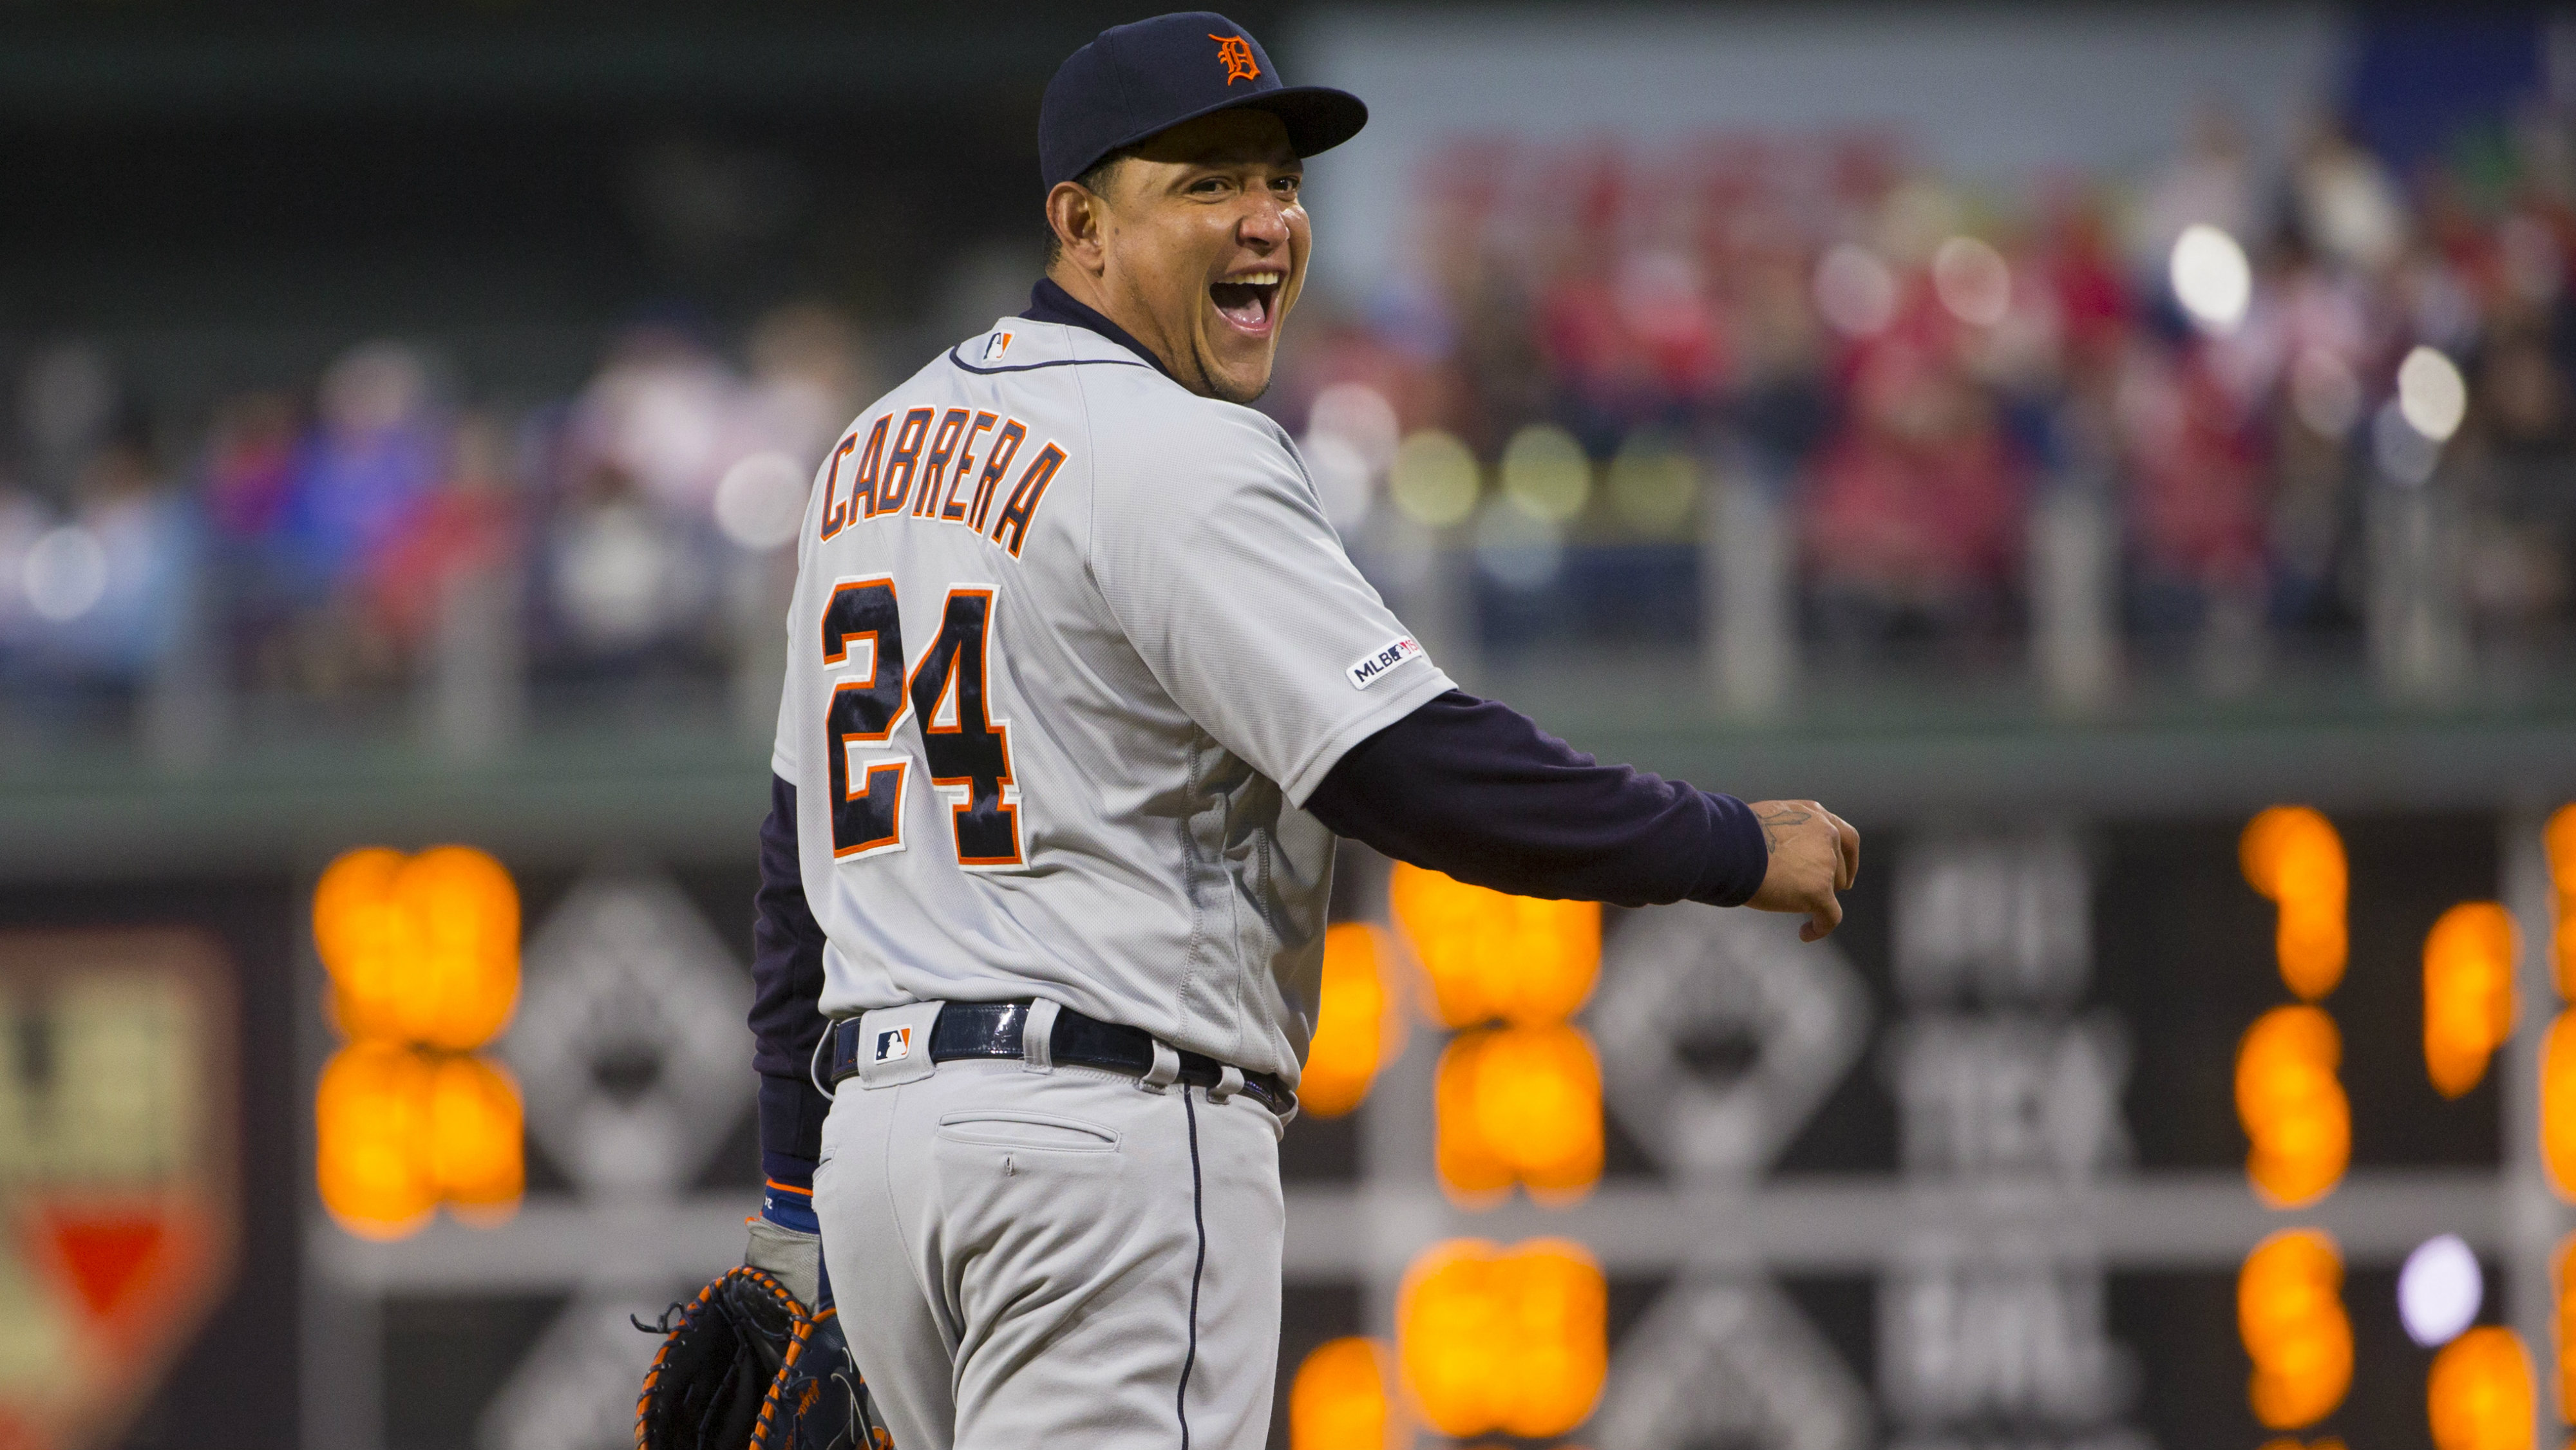 Detroit Tigers' Miguel Cabrera wins MLB's first 'Triple Crown' in